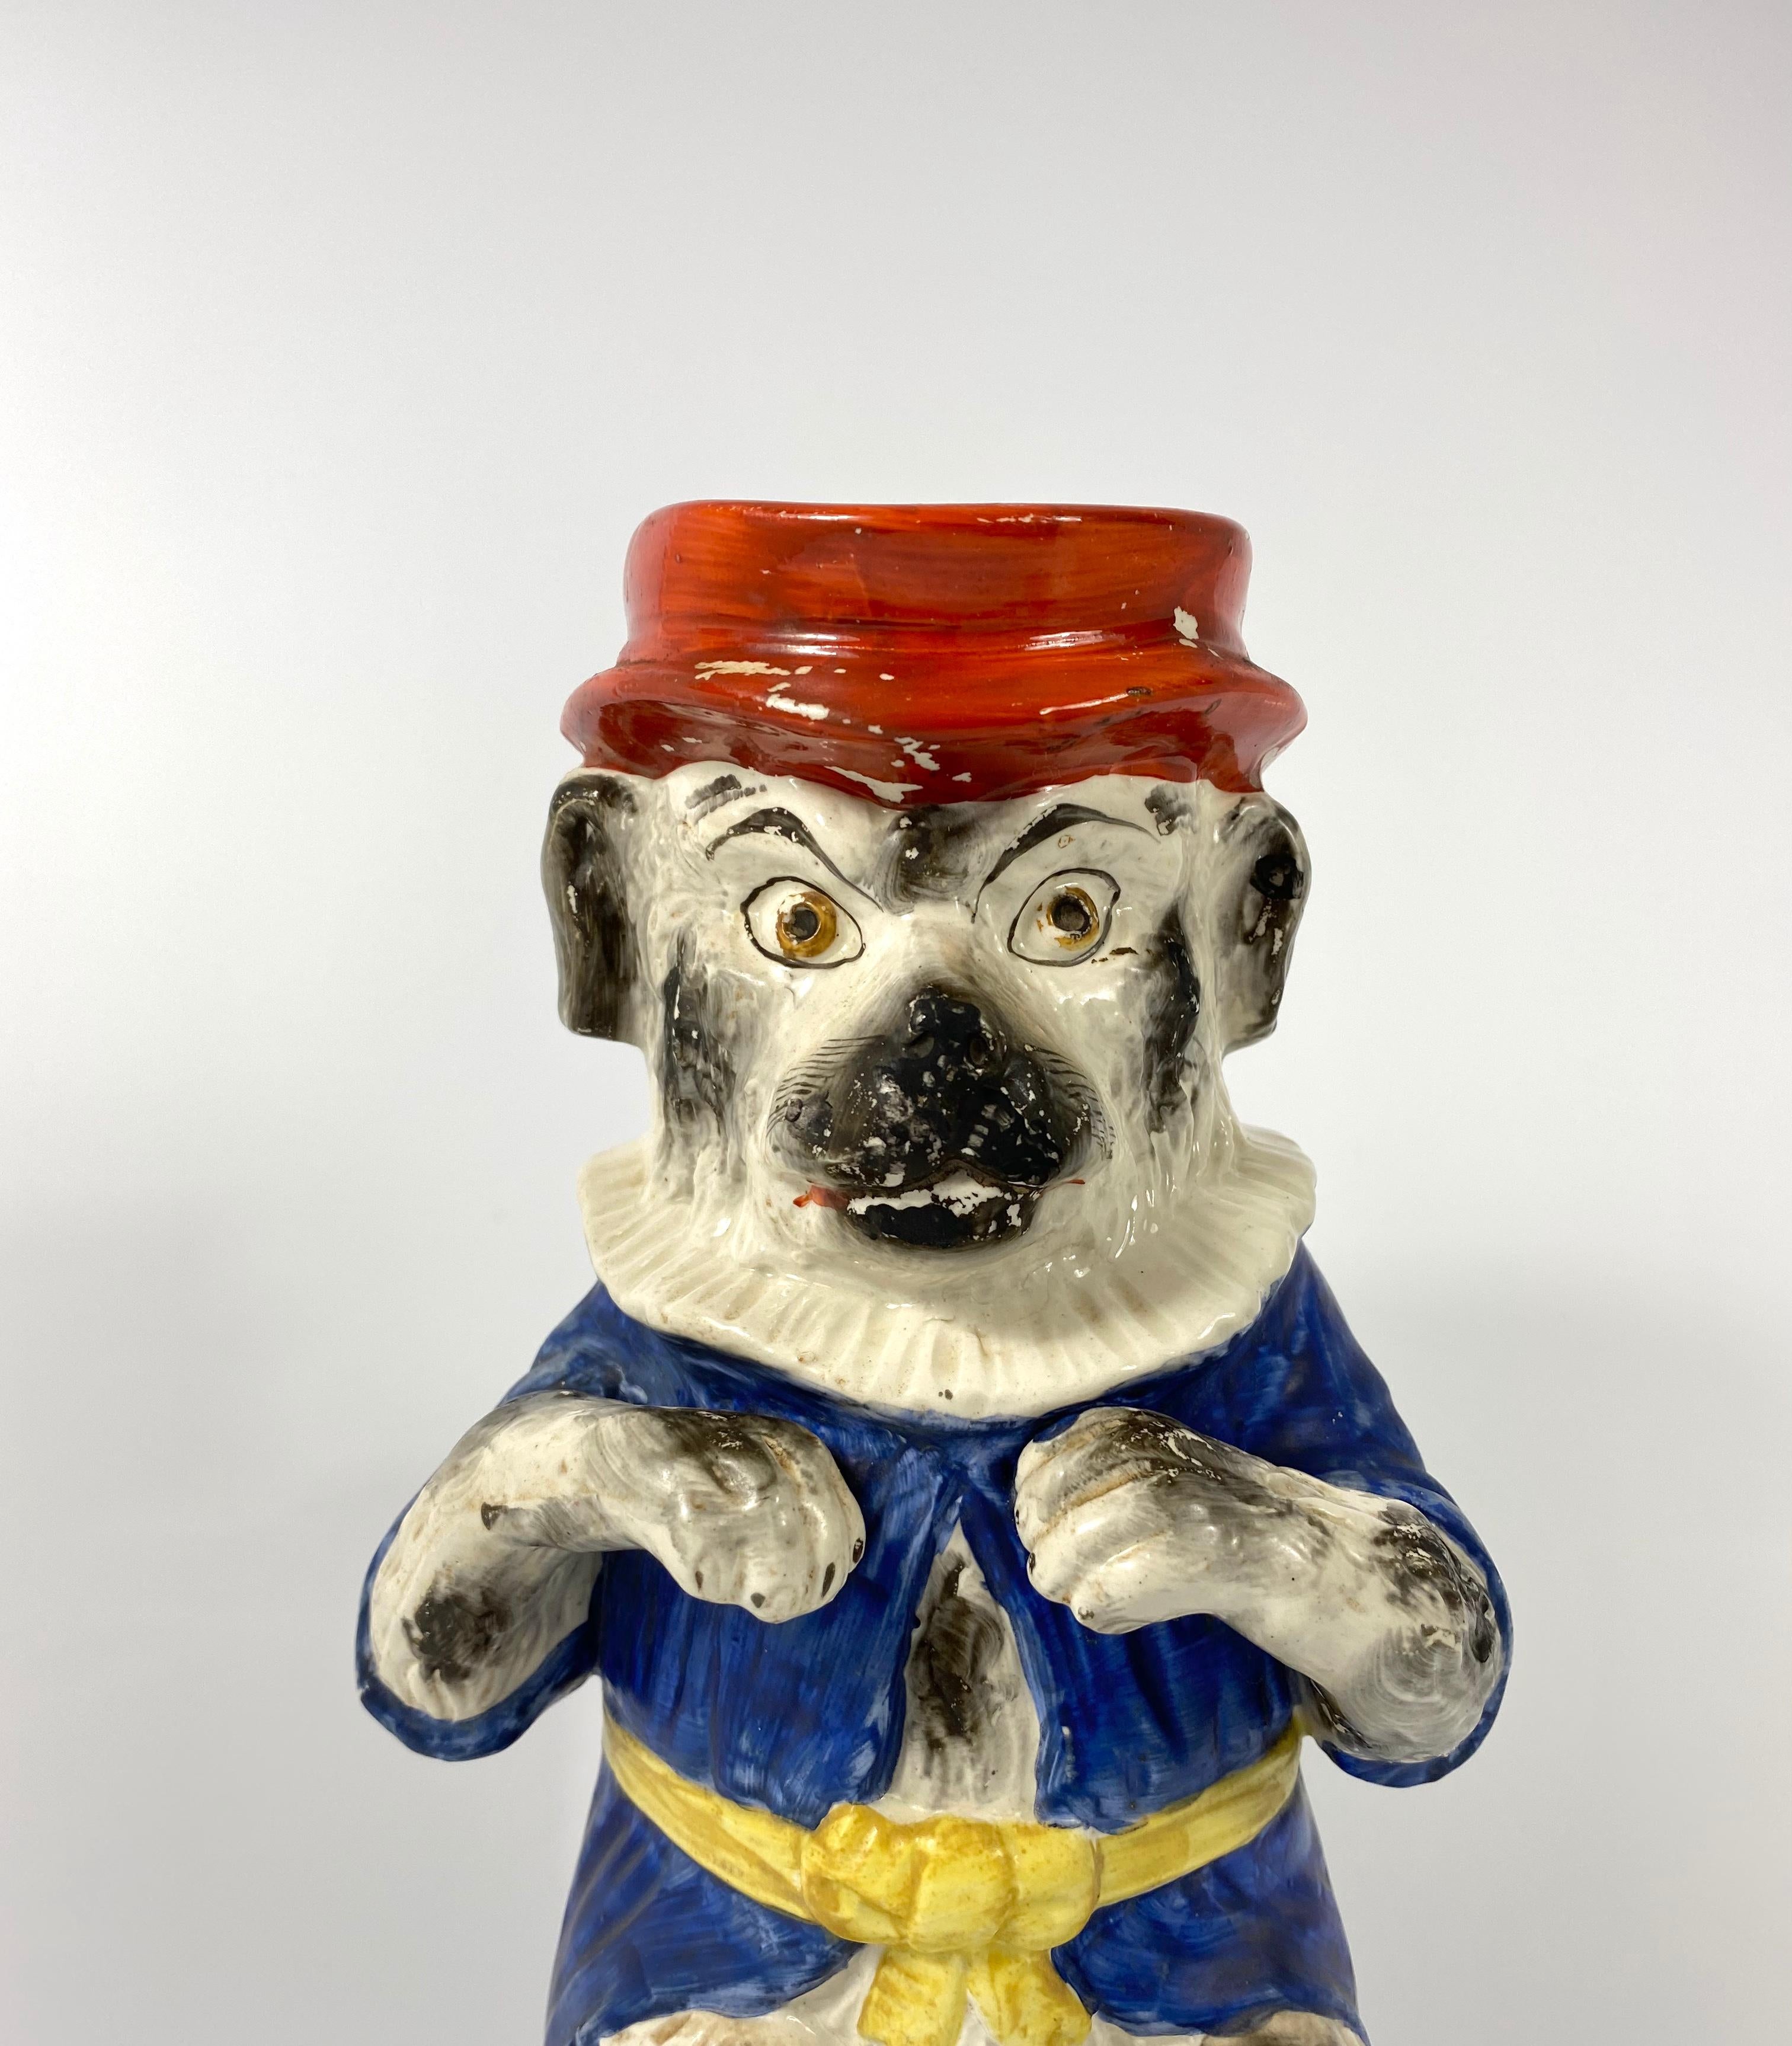 A rare Staffordshire pottery jug, circa 1860. Unusually and amusingly modelled as Mr. Punch’s dog, Toby. The dog stood on its hind legs, wearing a blue coat, a ruff, and his hat forming the spout. Having a simulated rope twist handle, and set upon a